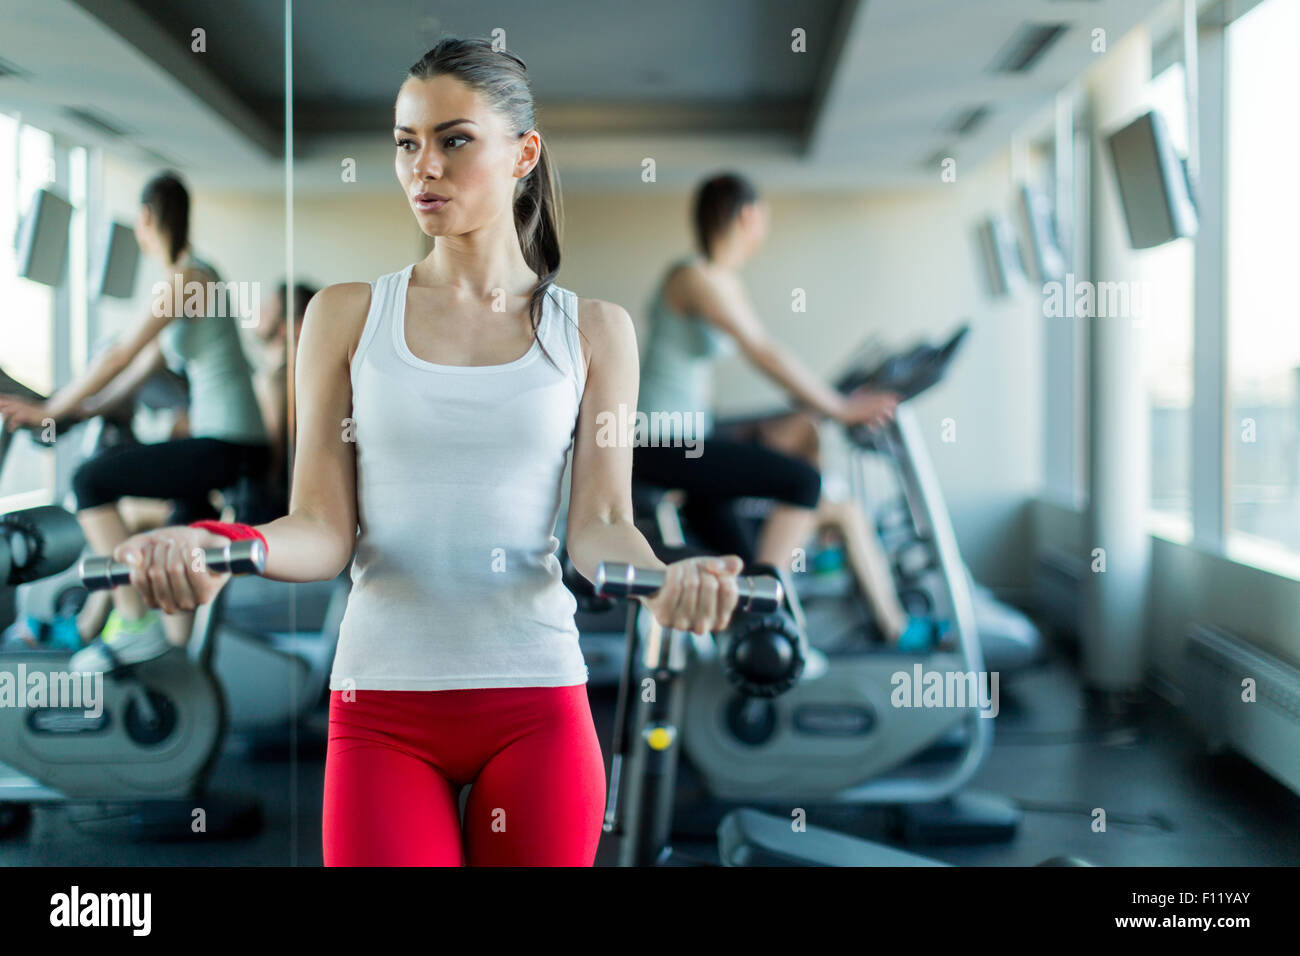 Beautiful, young woman lifting weights in a gym standing next to a mirror Stock Photo